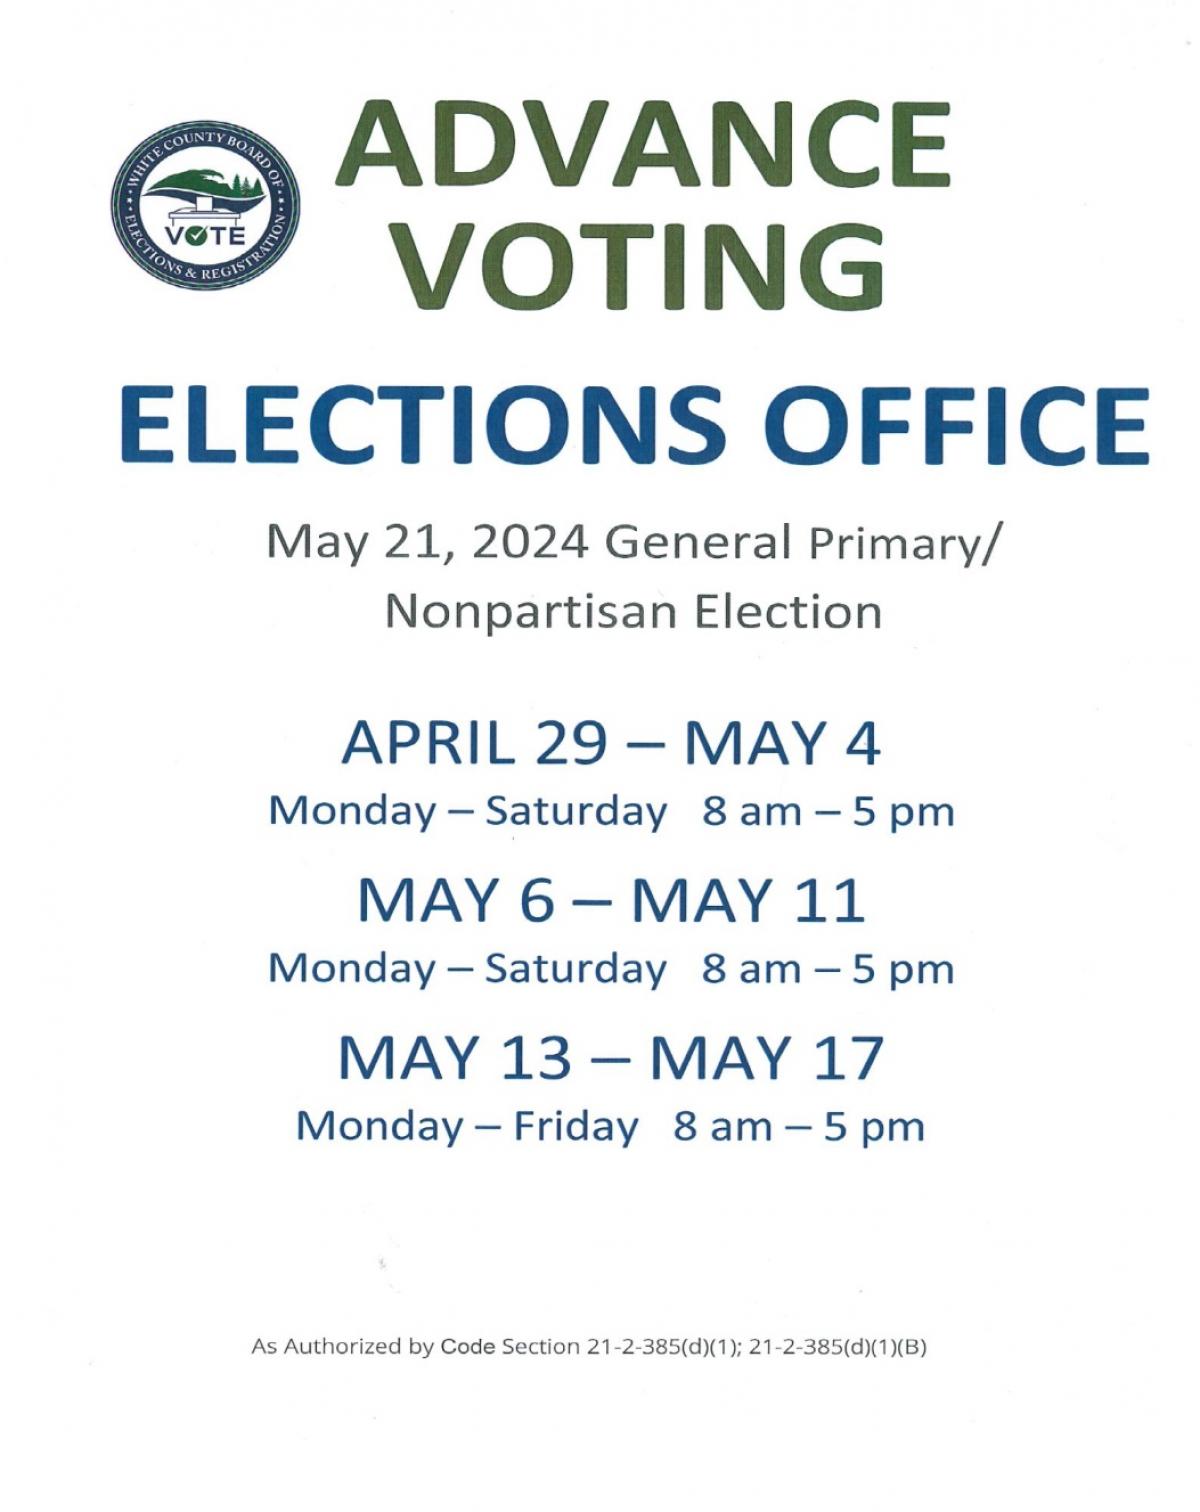 ADVANCE VOTING DATES AND TIMES